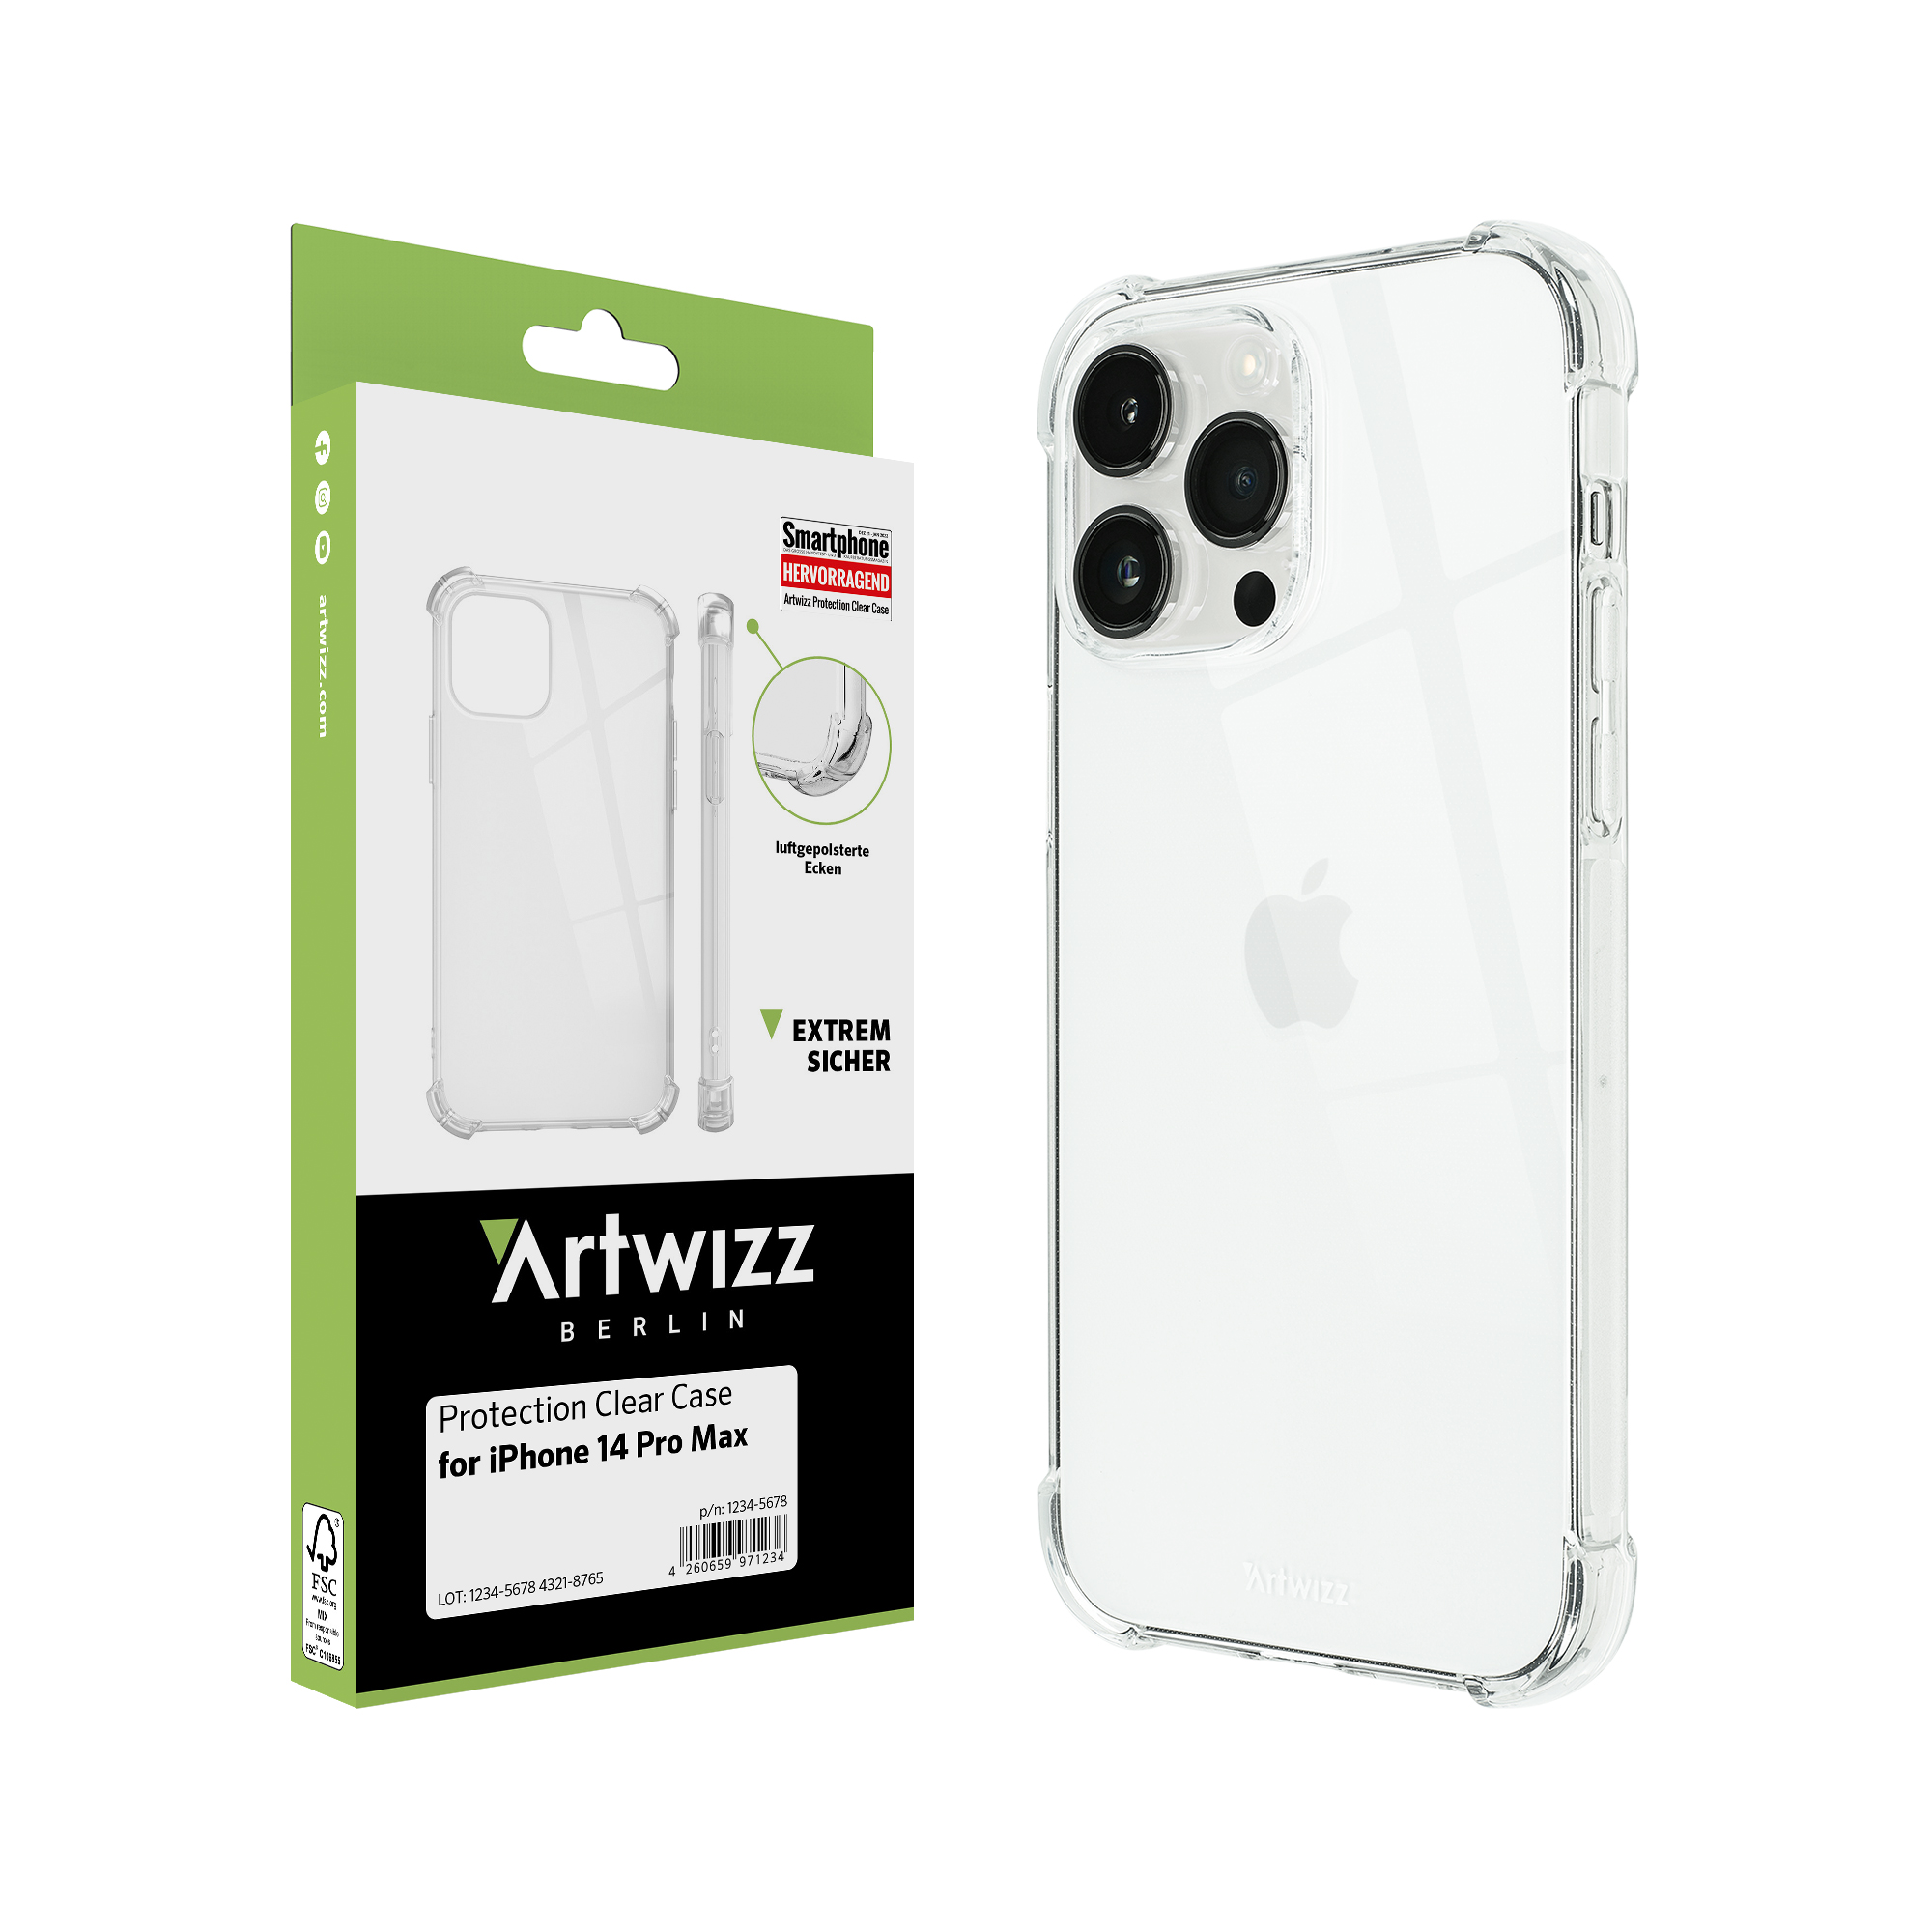 14 iPhone Max, ARTWIZZ Backcover, Transparent Protection Pro Case, Apple, Clear